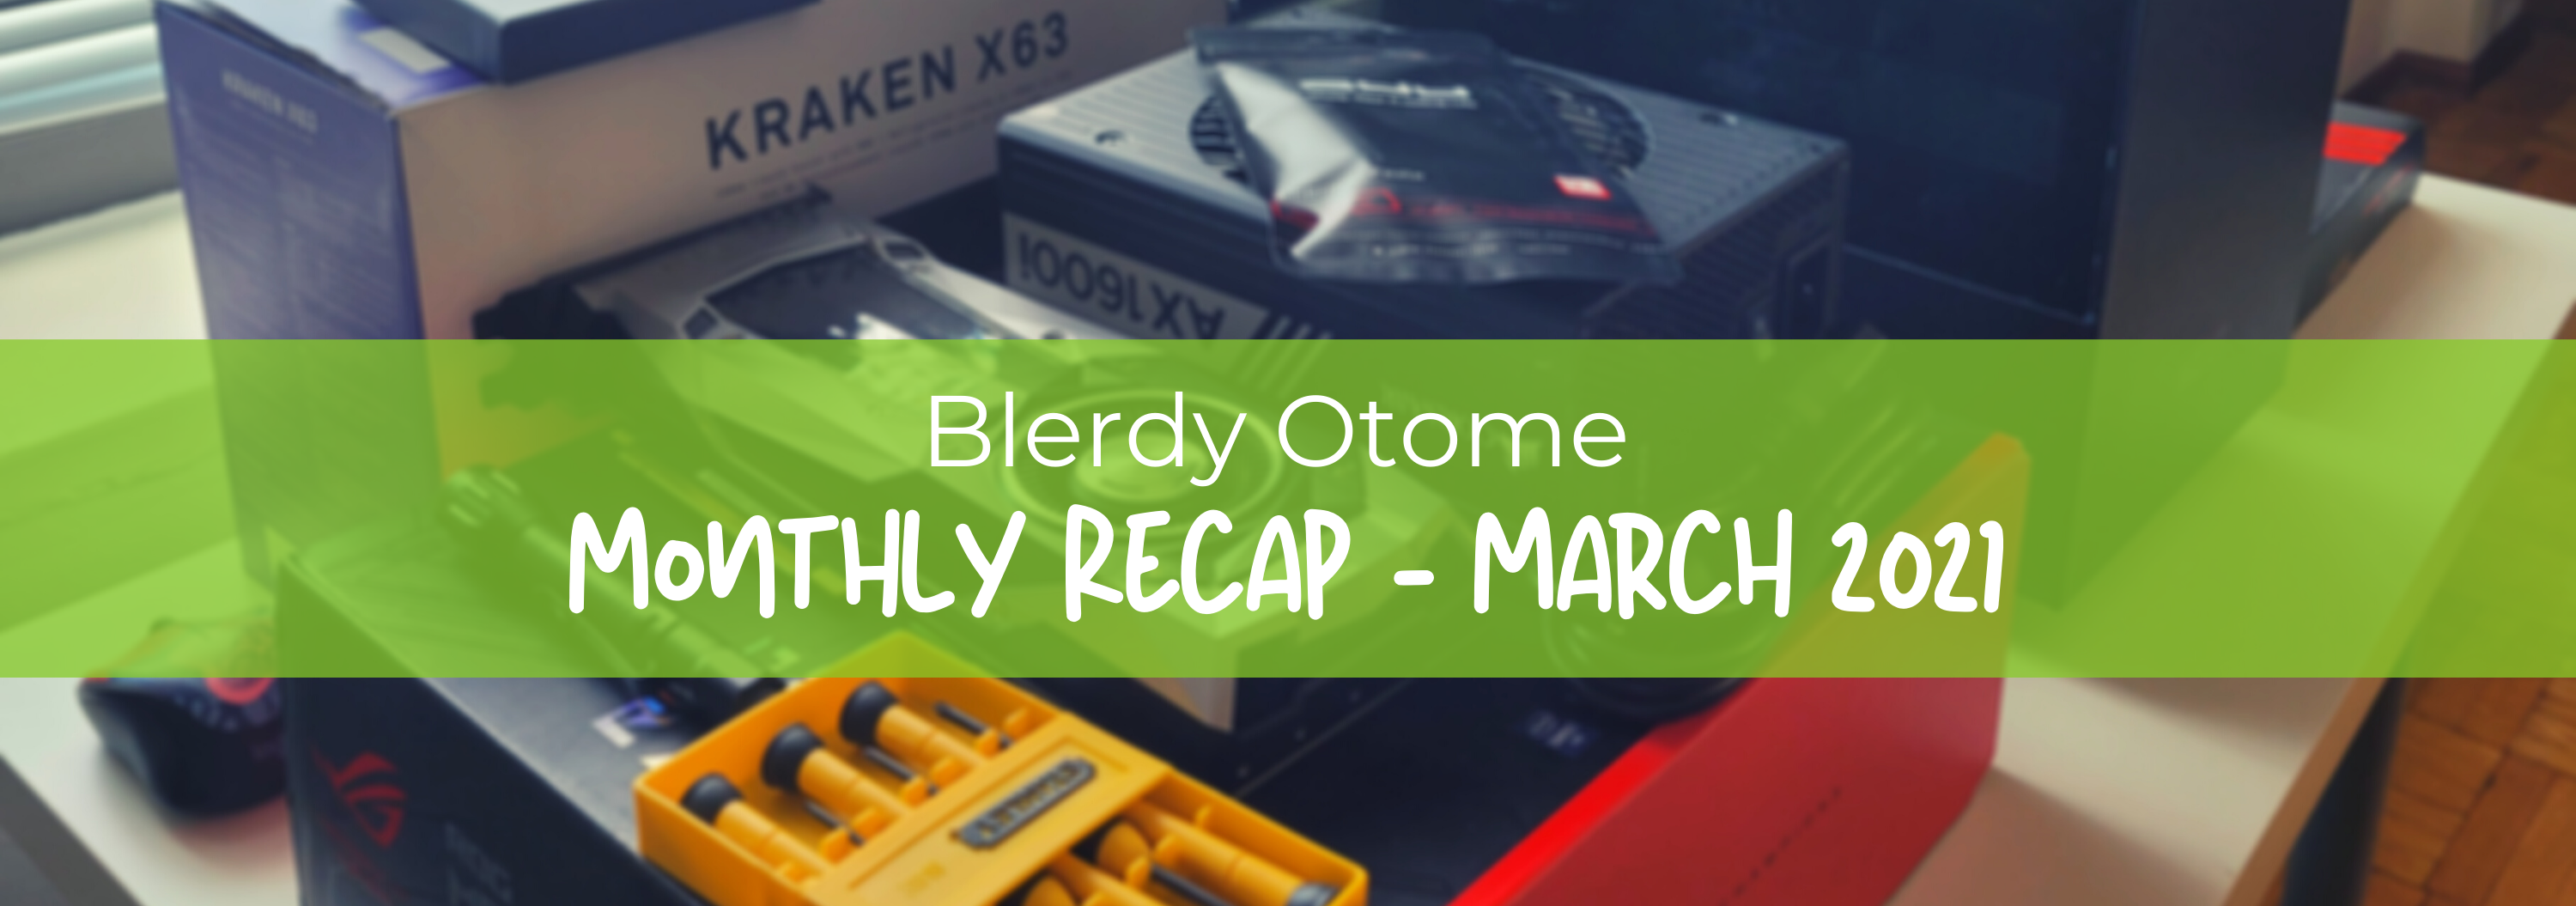 Blerdy Otome Monthly Recap – March 2021